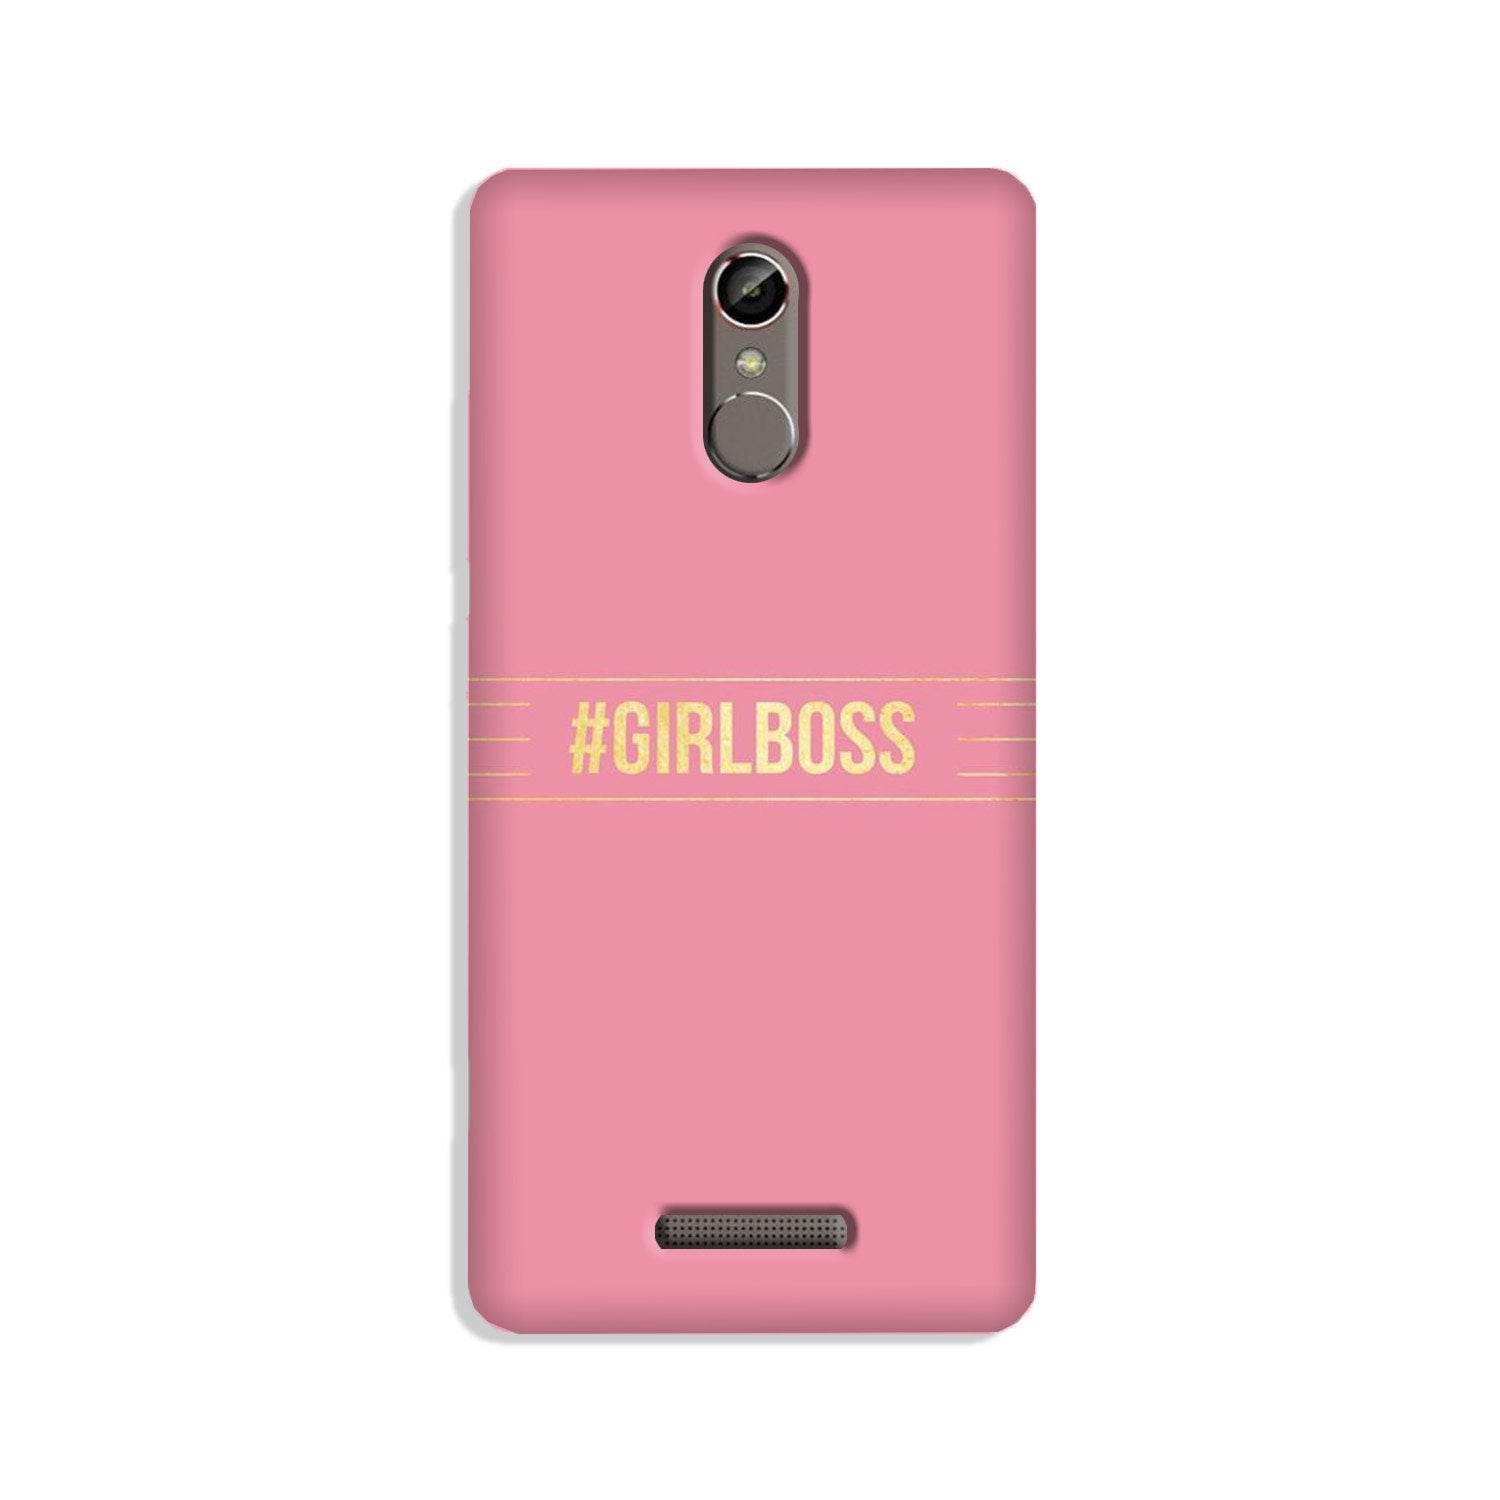 Girl Boss Pink Case for Gionee S6s (Design No. 263)